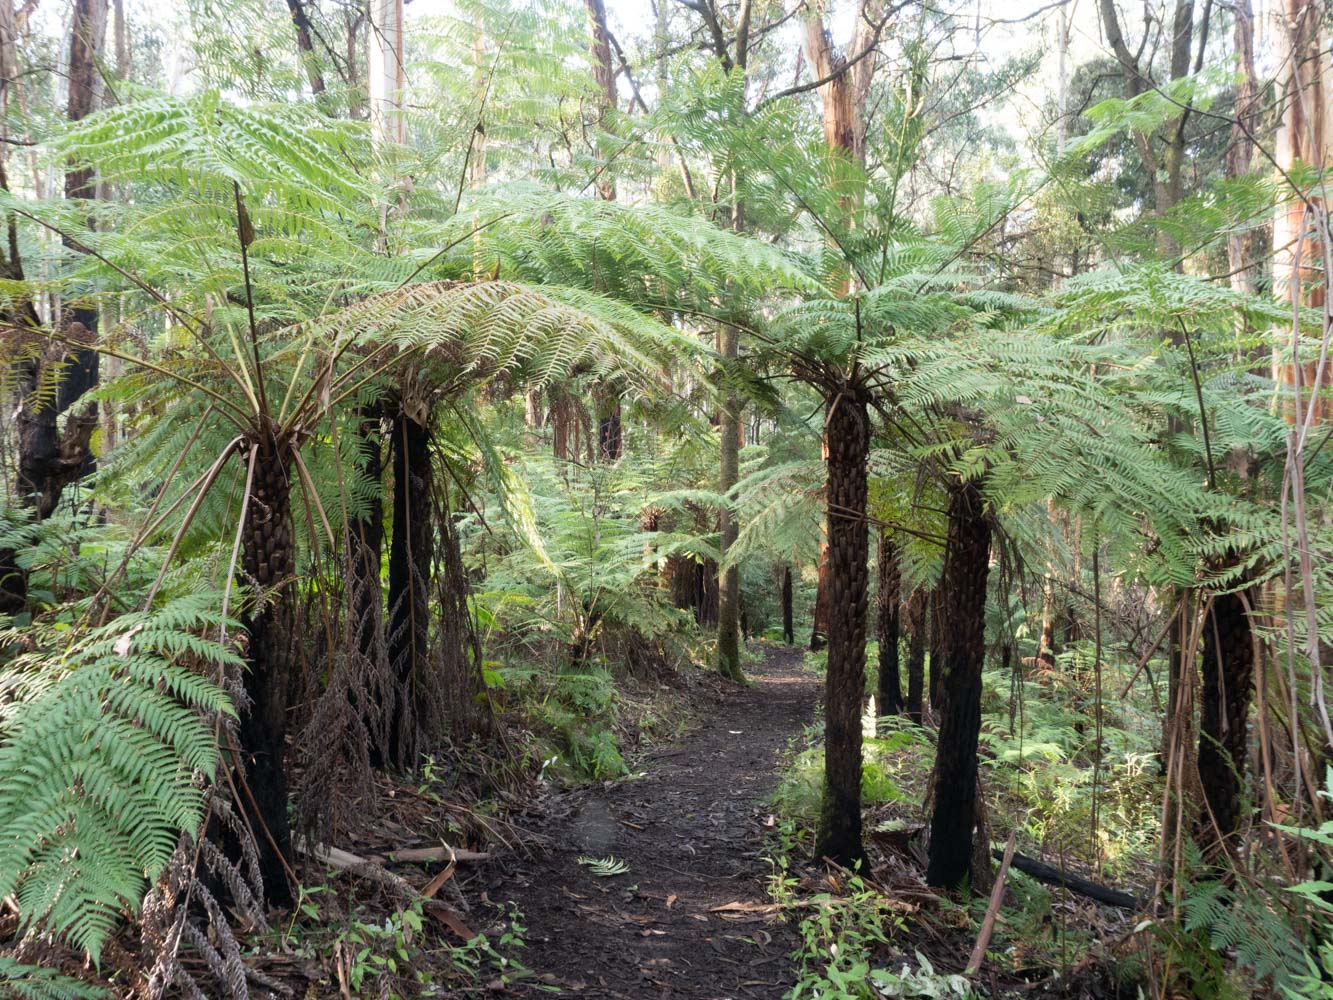 A dirt path meanders downhill amongst tree ferns on the fern gully walk in Forrest Victoria